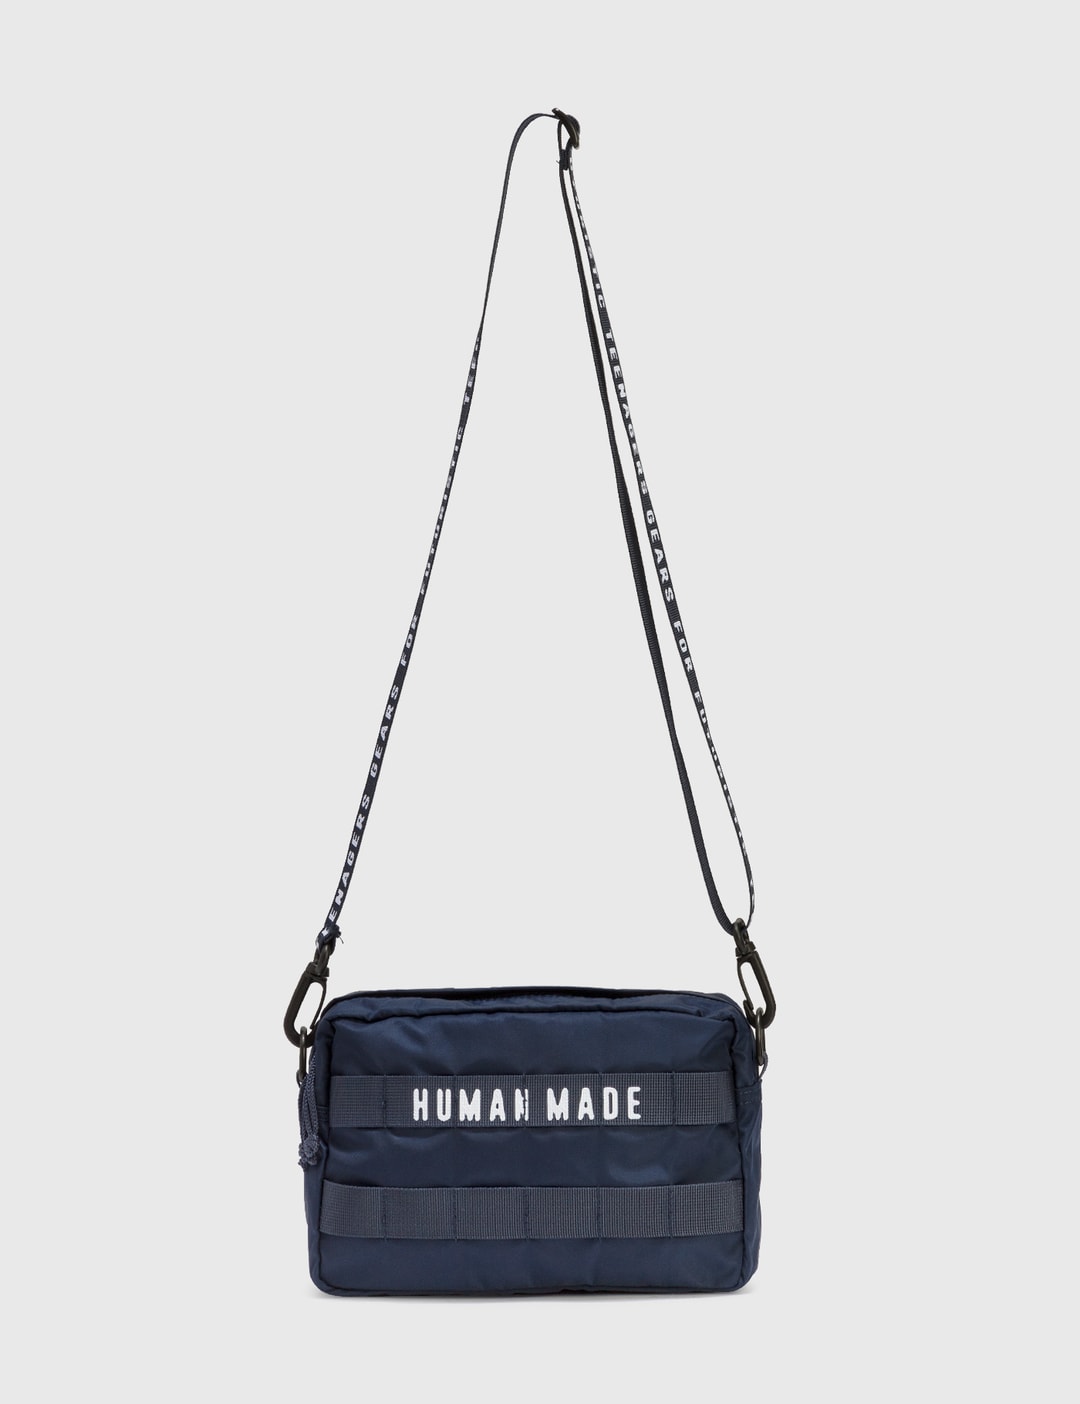 Human Made - Military Pouch #1 | HBX - Globally Curated Fashion and ...